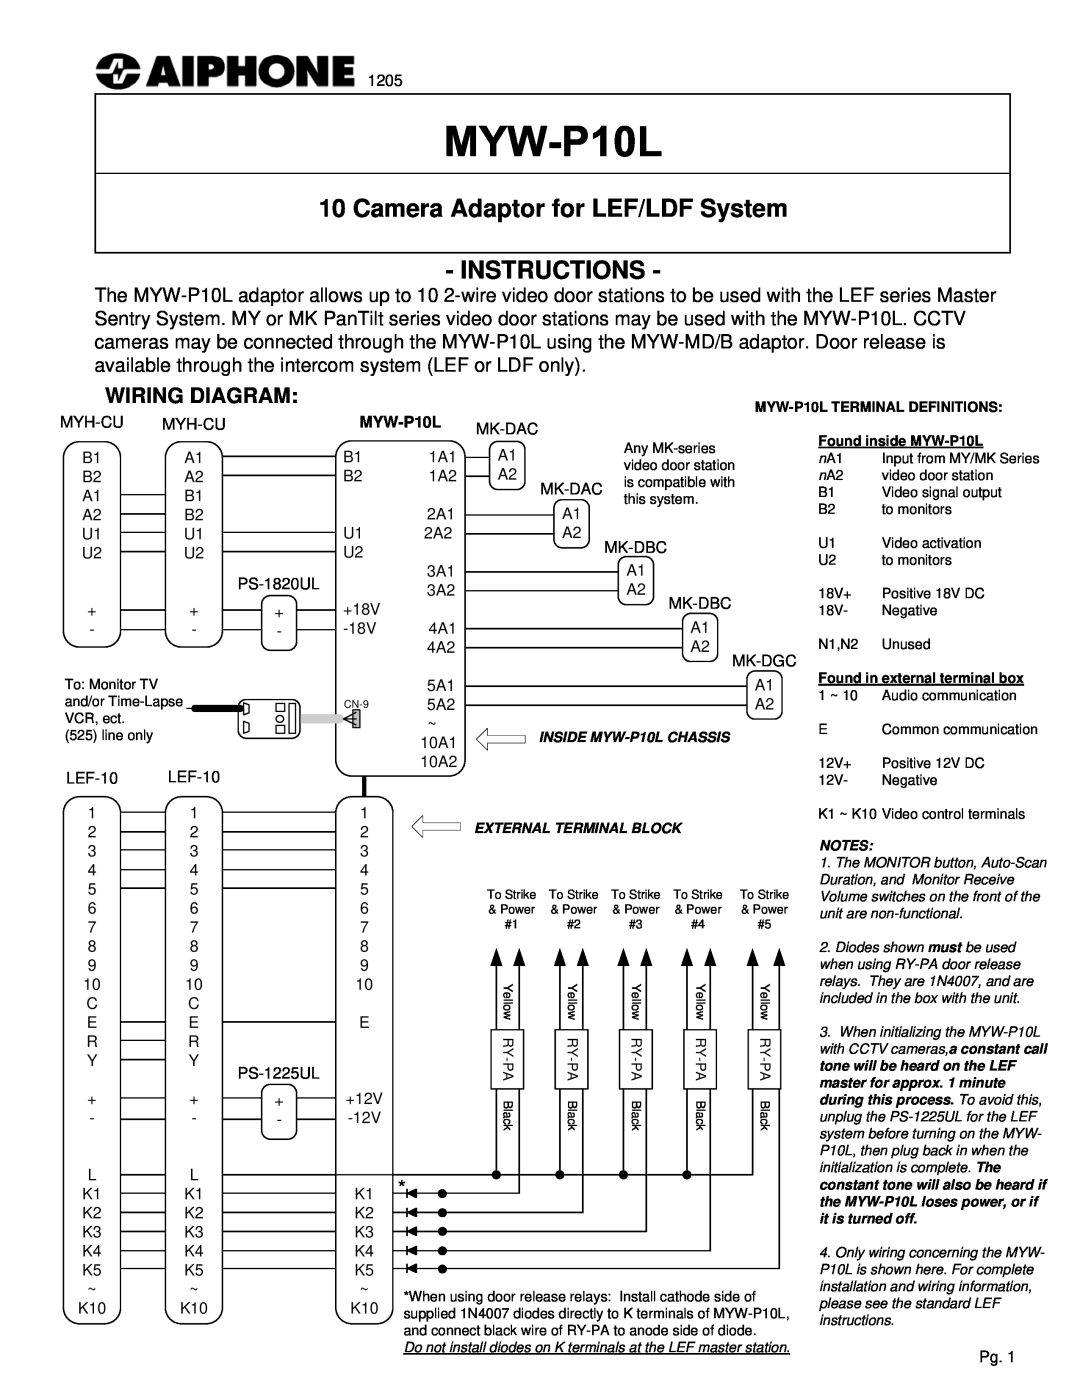 Aiphone MYW-P10L manual Wiring Diagram, Camera Adaptor for LEF/LDF System INSTRUCTIONS 